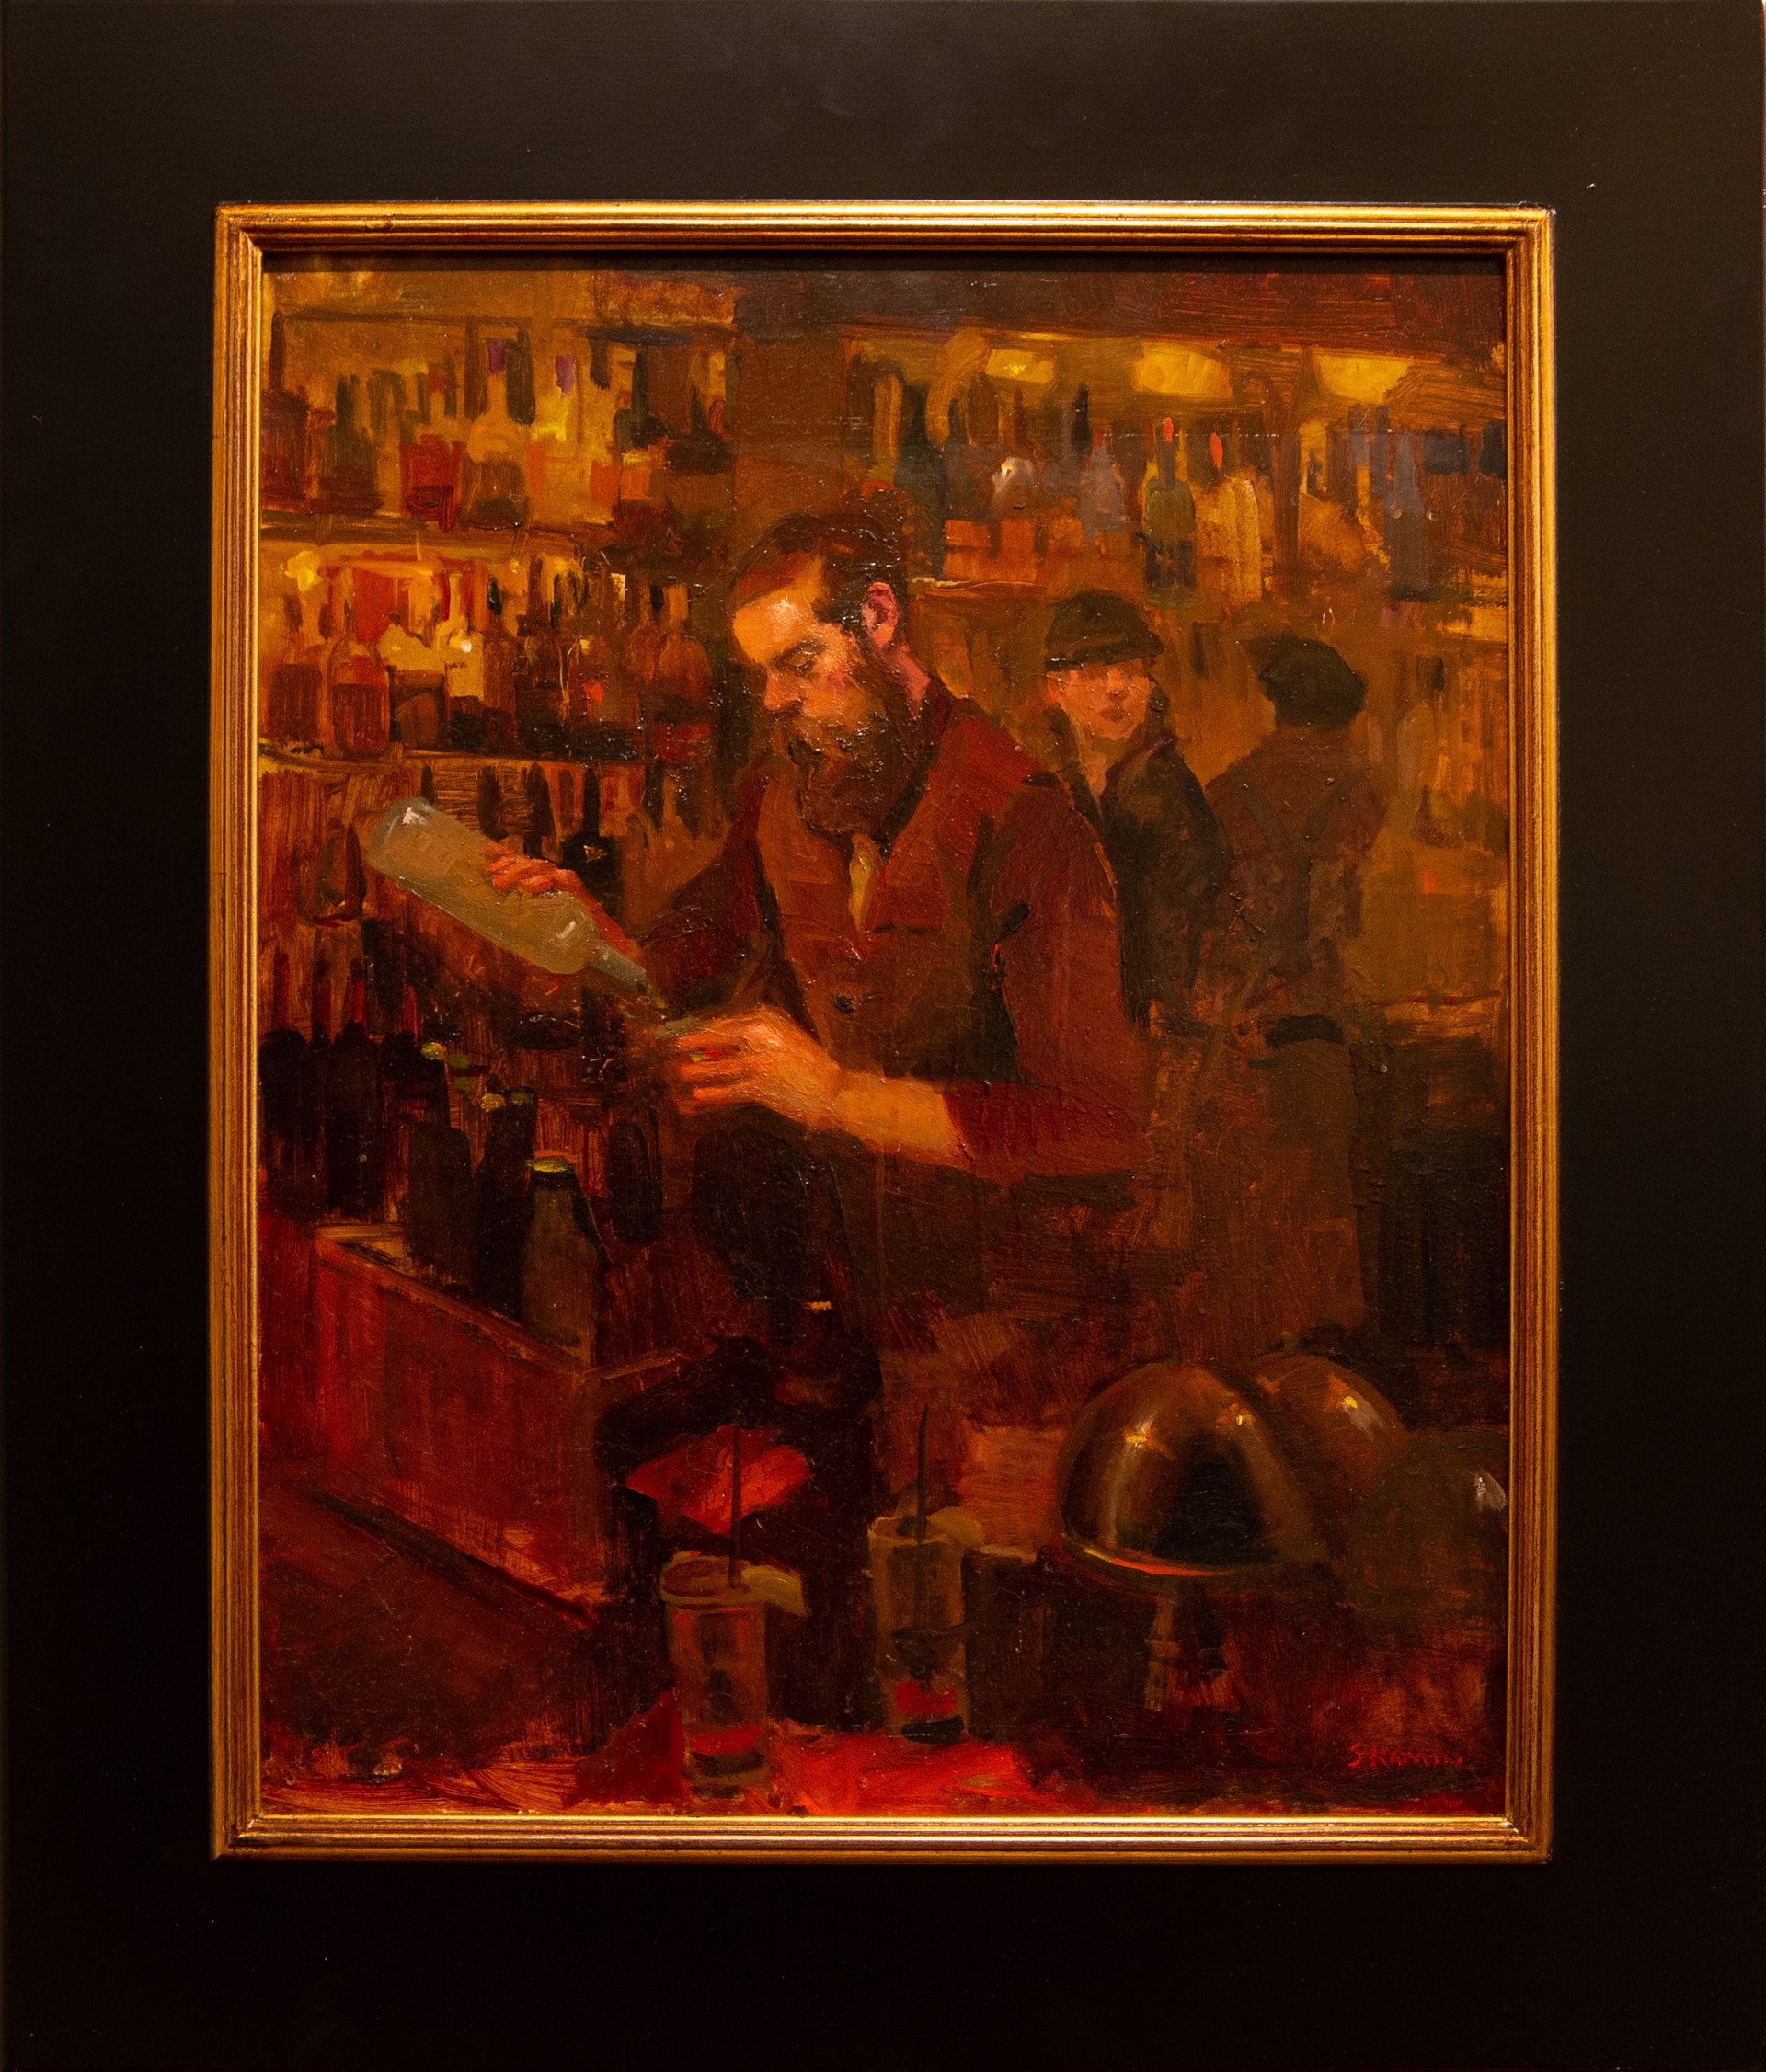 Bartender by Stacy Kamin